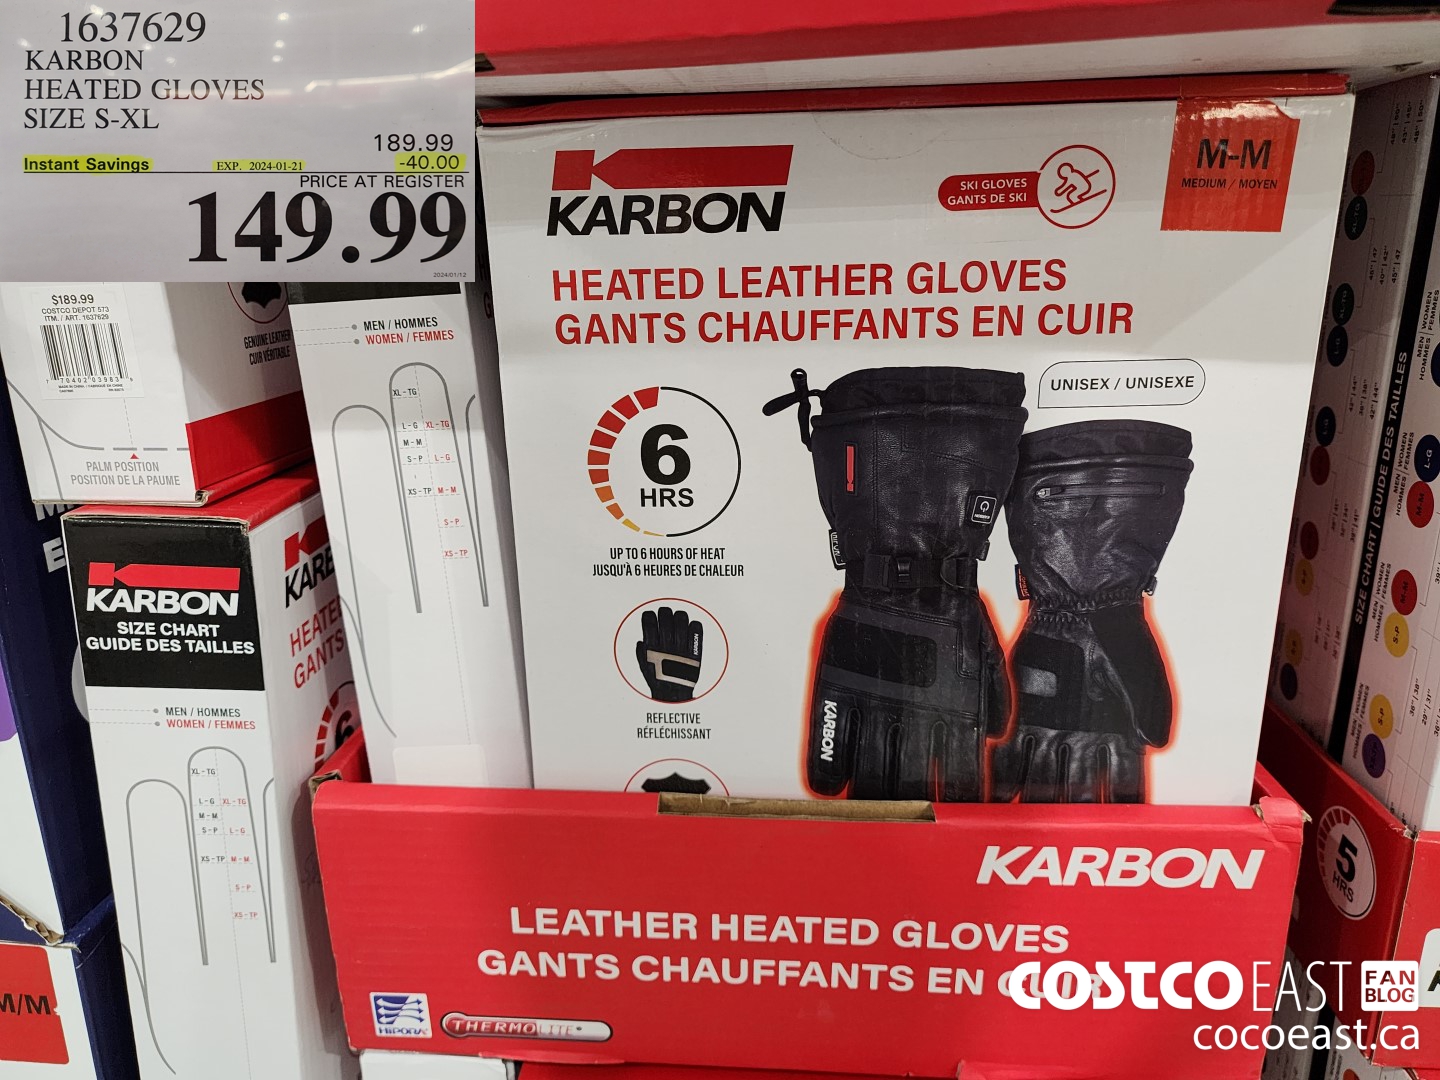 2121514 SPYDER GLOVE SIZES XS XL 4 00 INSTANT SAVINGS EXPIRES ON 2020 12 06  14 89 - Costco East Fan Blog